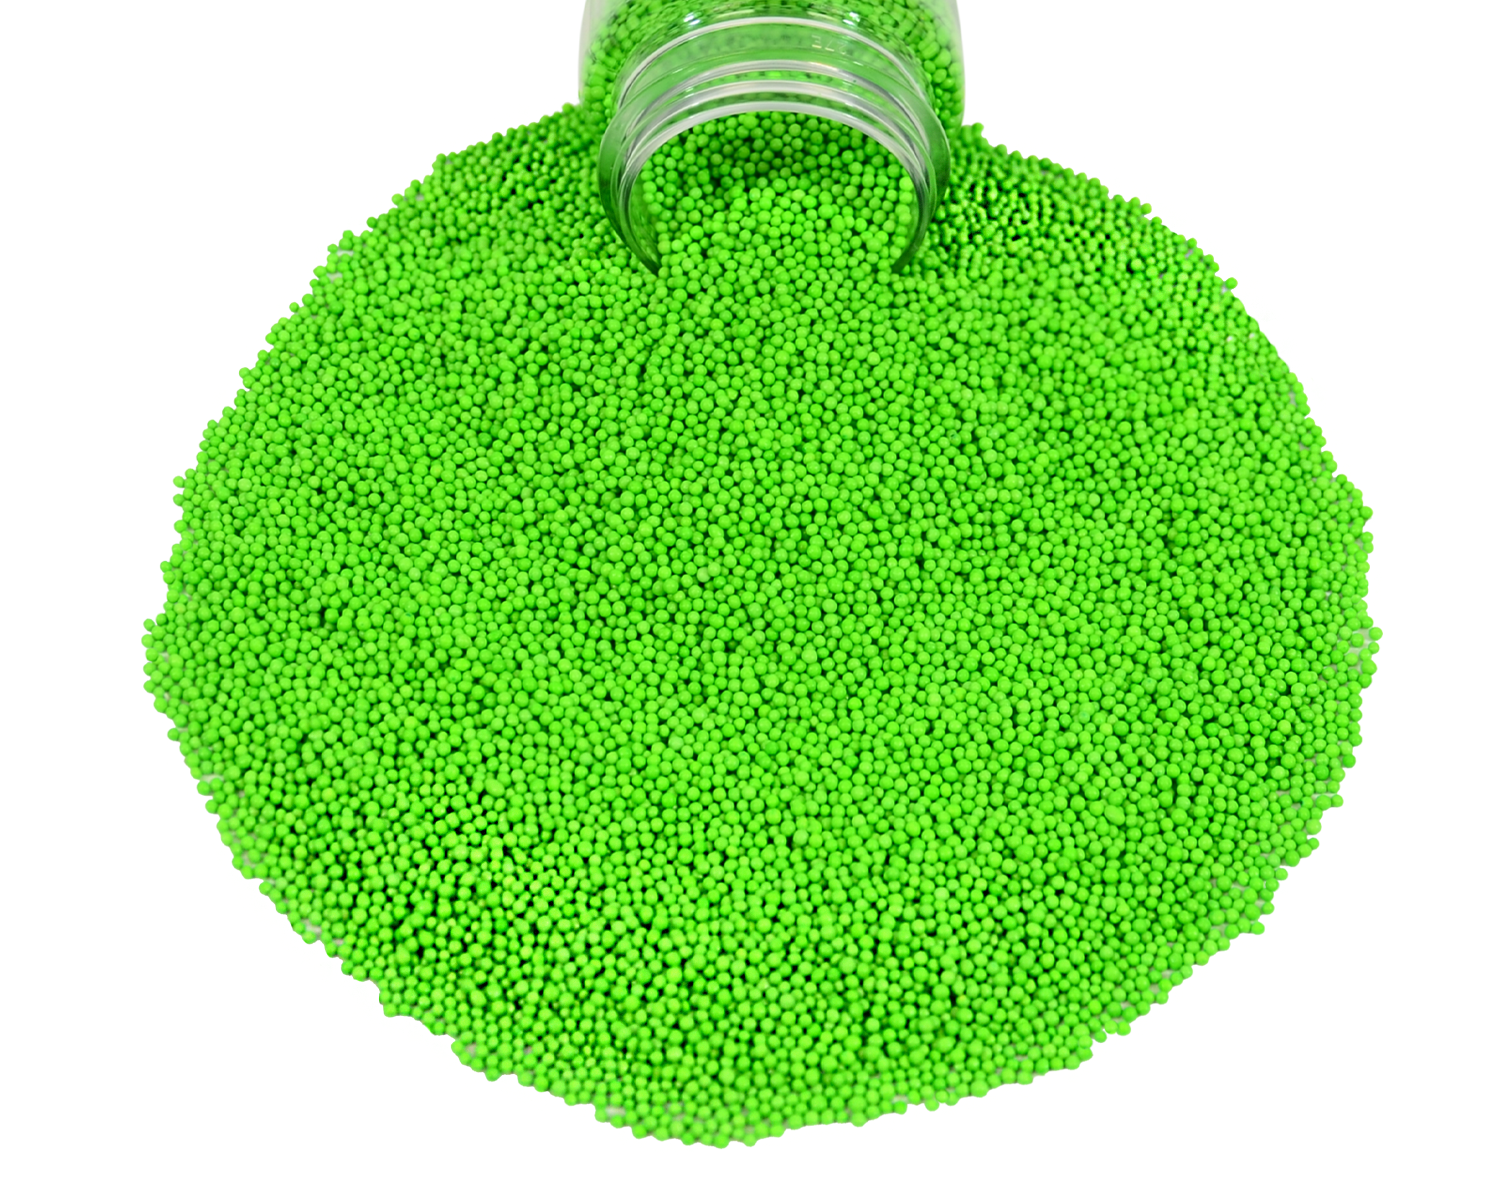 Mystic Sprinkles Luscious Lime Green Nonpareils 3.8 Ounce Bottle - image 4 of 4